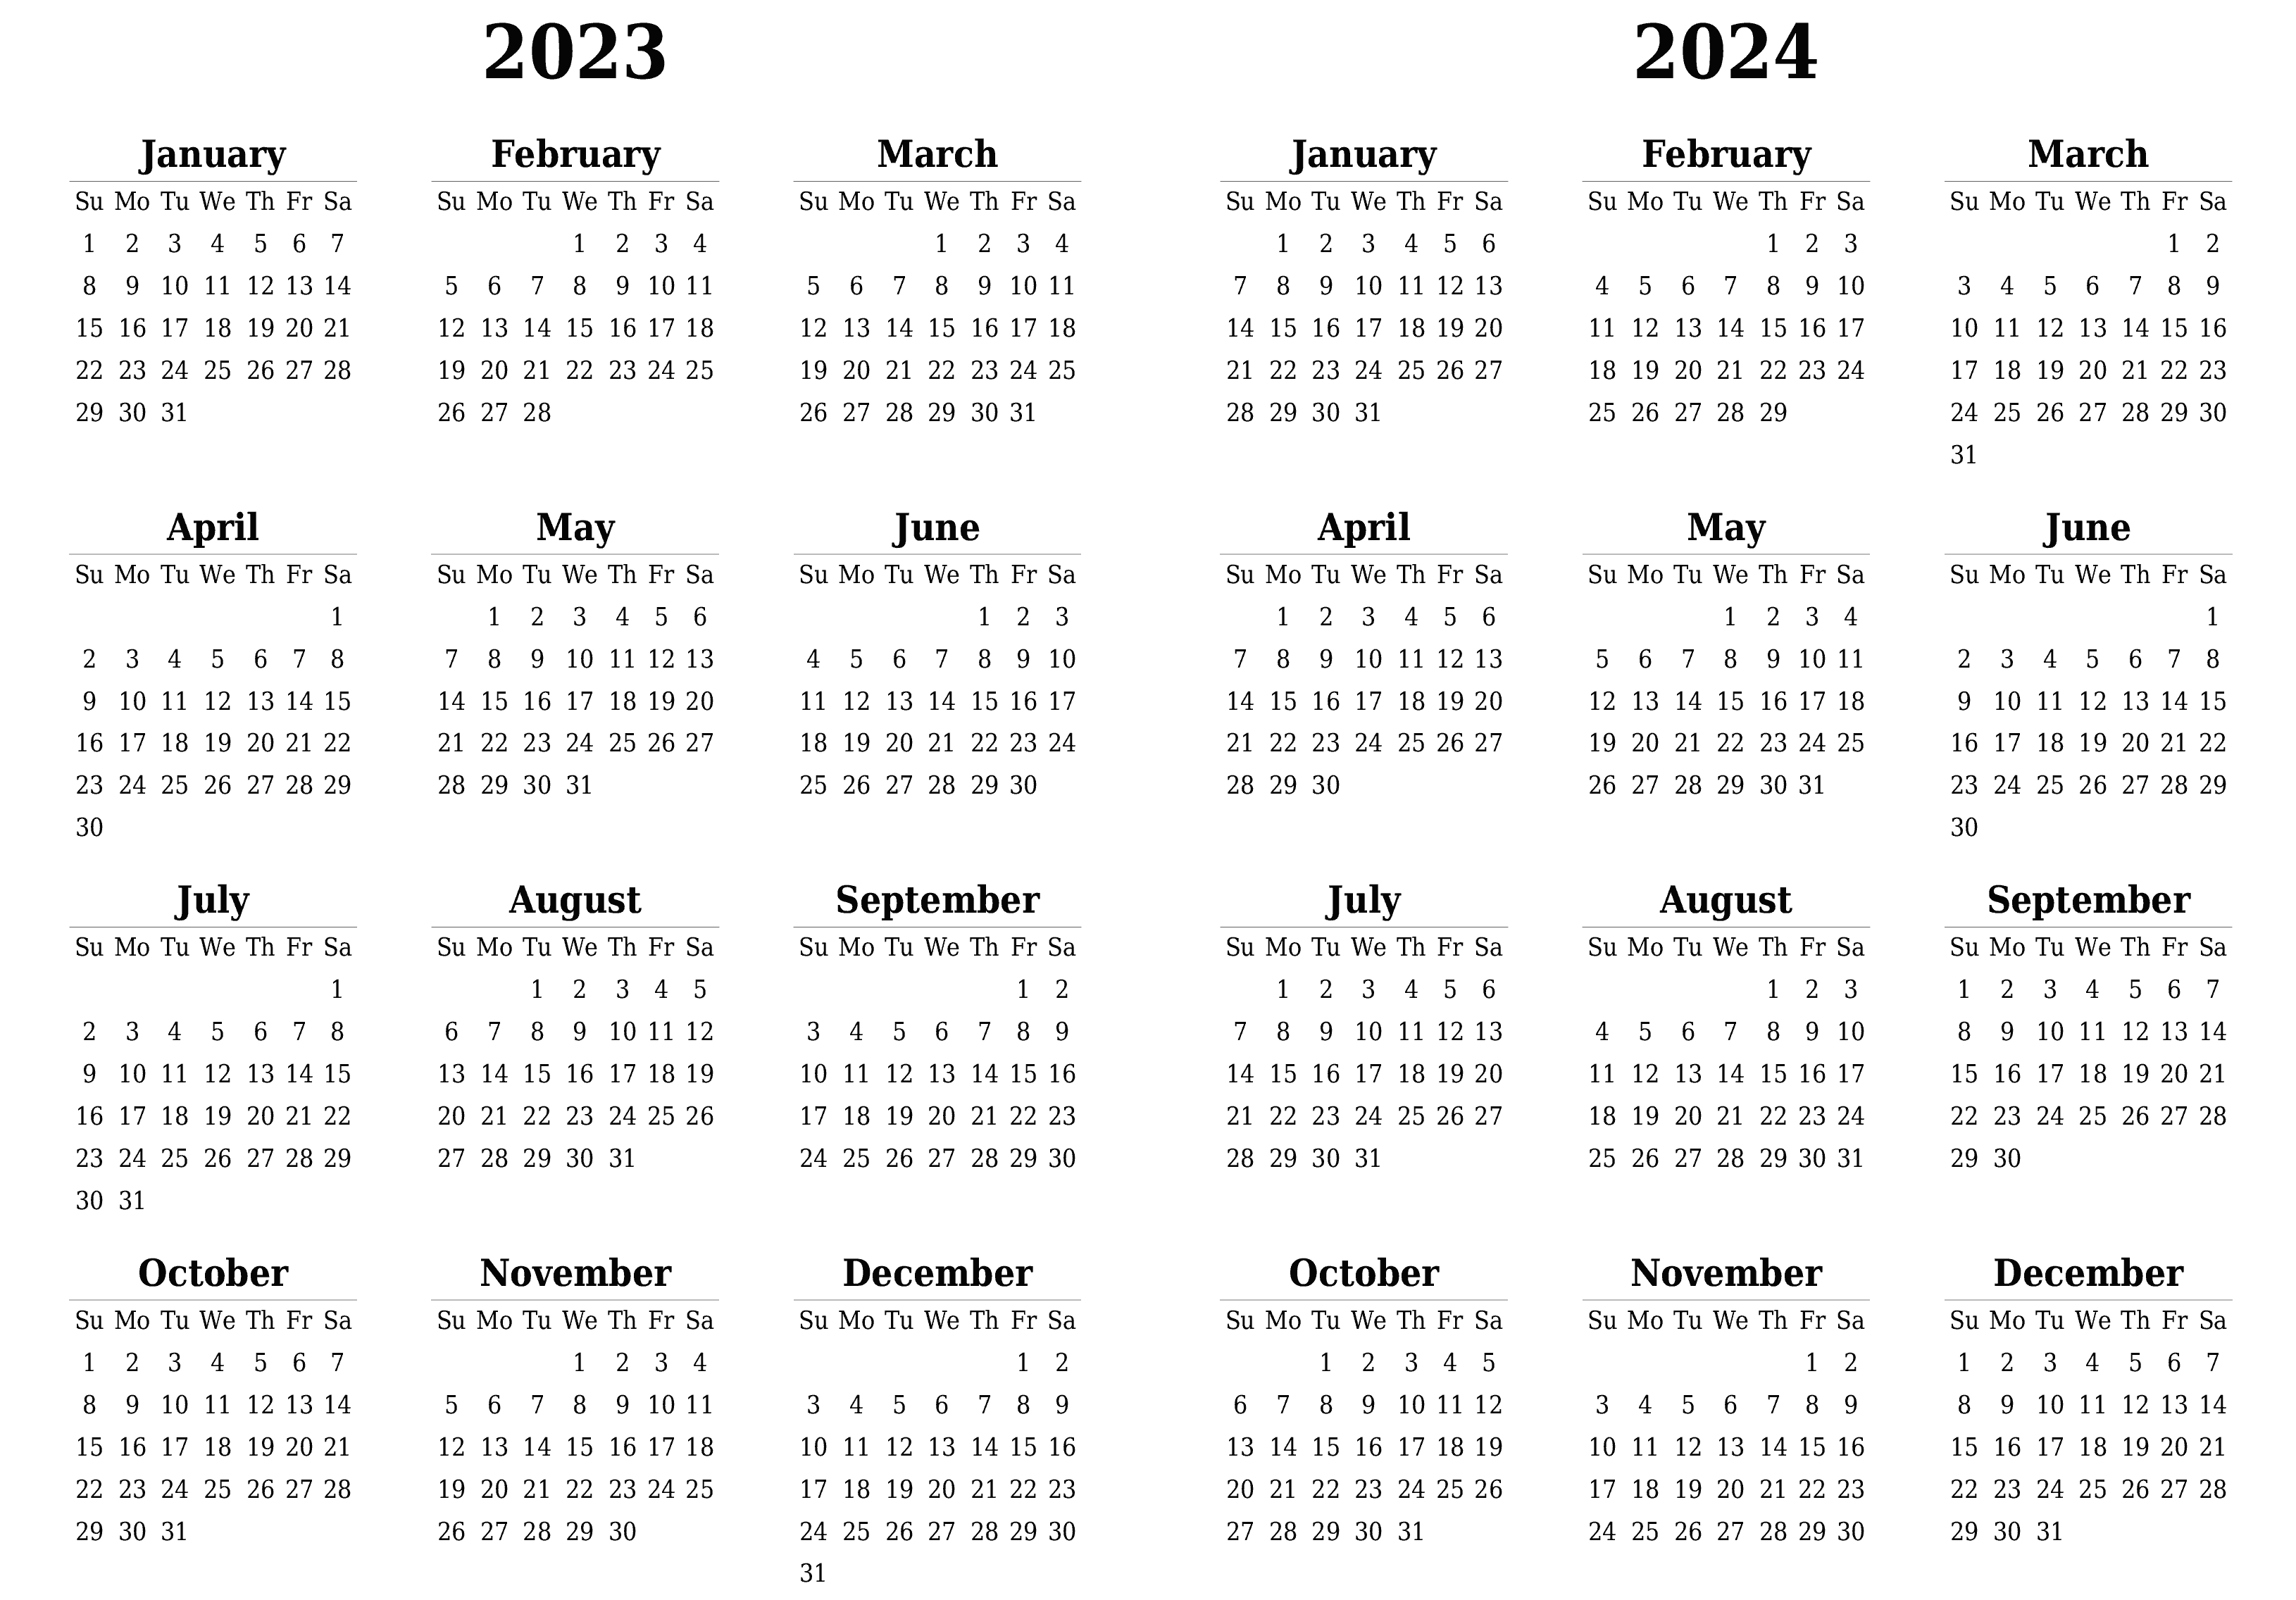 yearlong calendars for both 2023 and 2024 - black and white